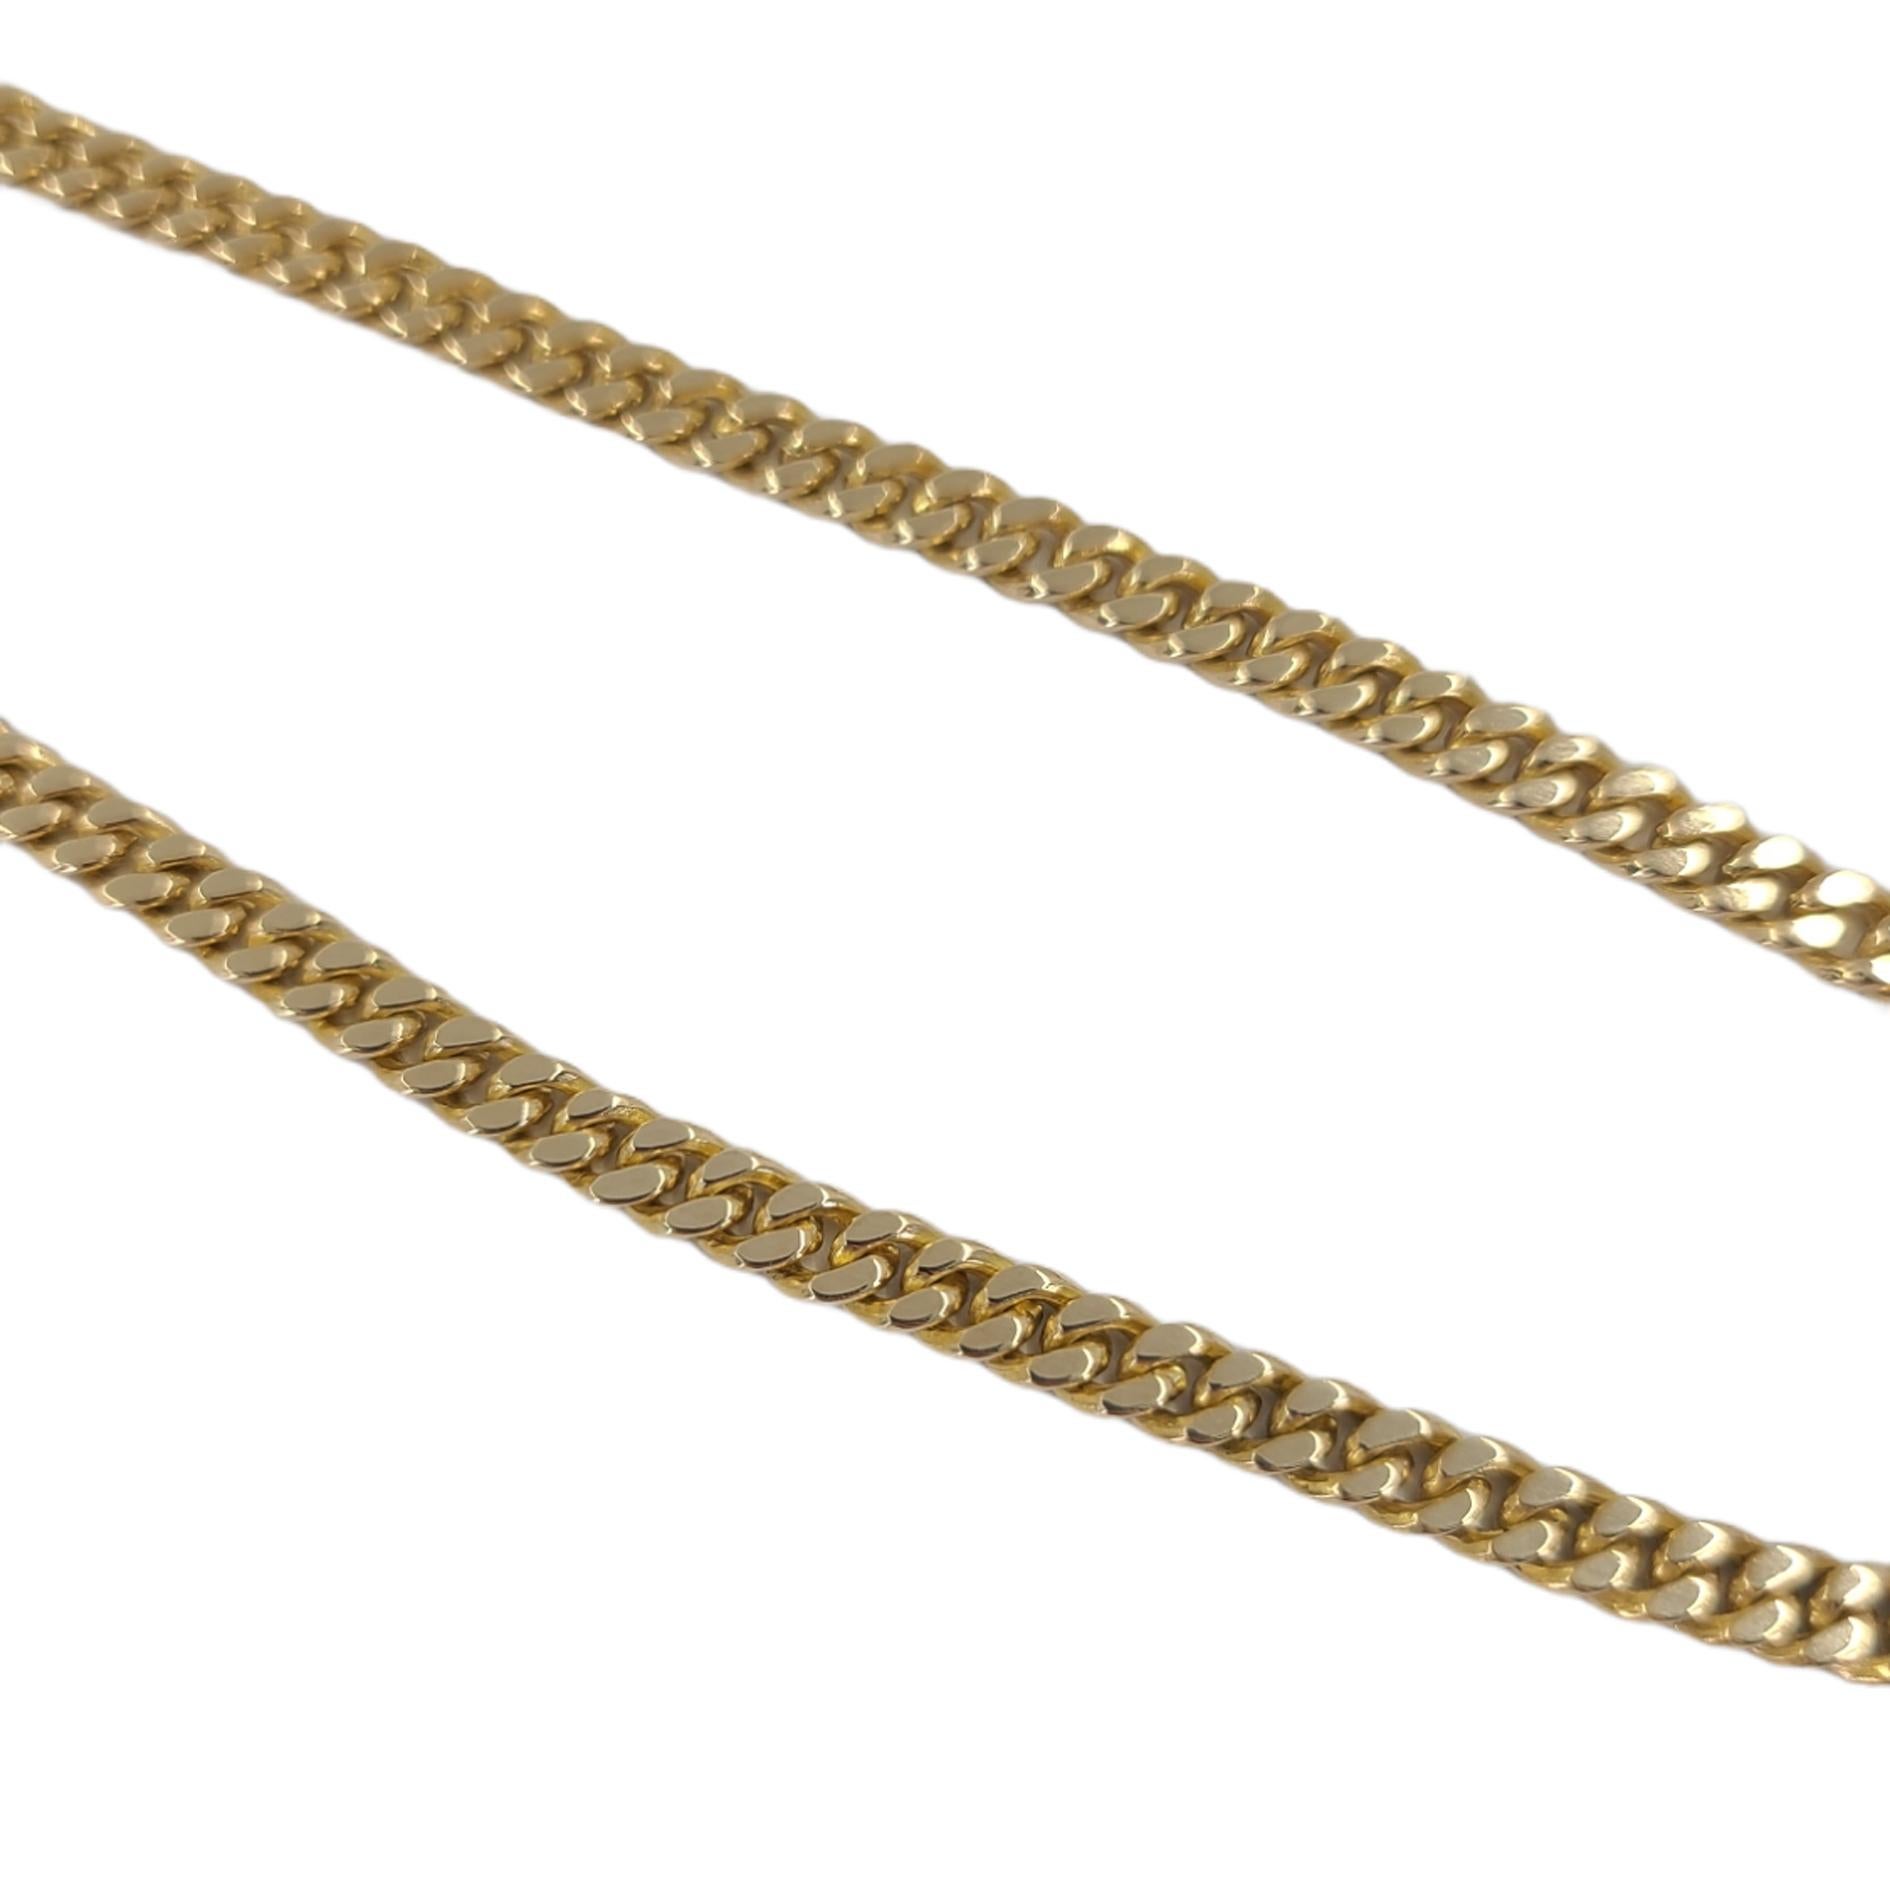 14 Karat Yellow Gold Flat Curb Link Chain Necklace Measuring 19 Inches Long With Lobster Clasp Closure. Finished Weight Is 27.2 Grams.